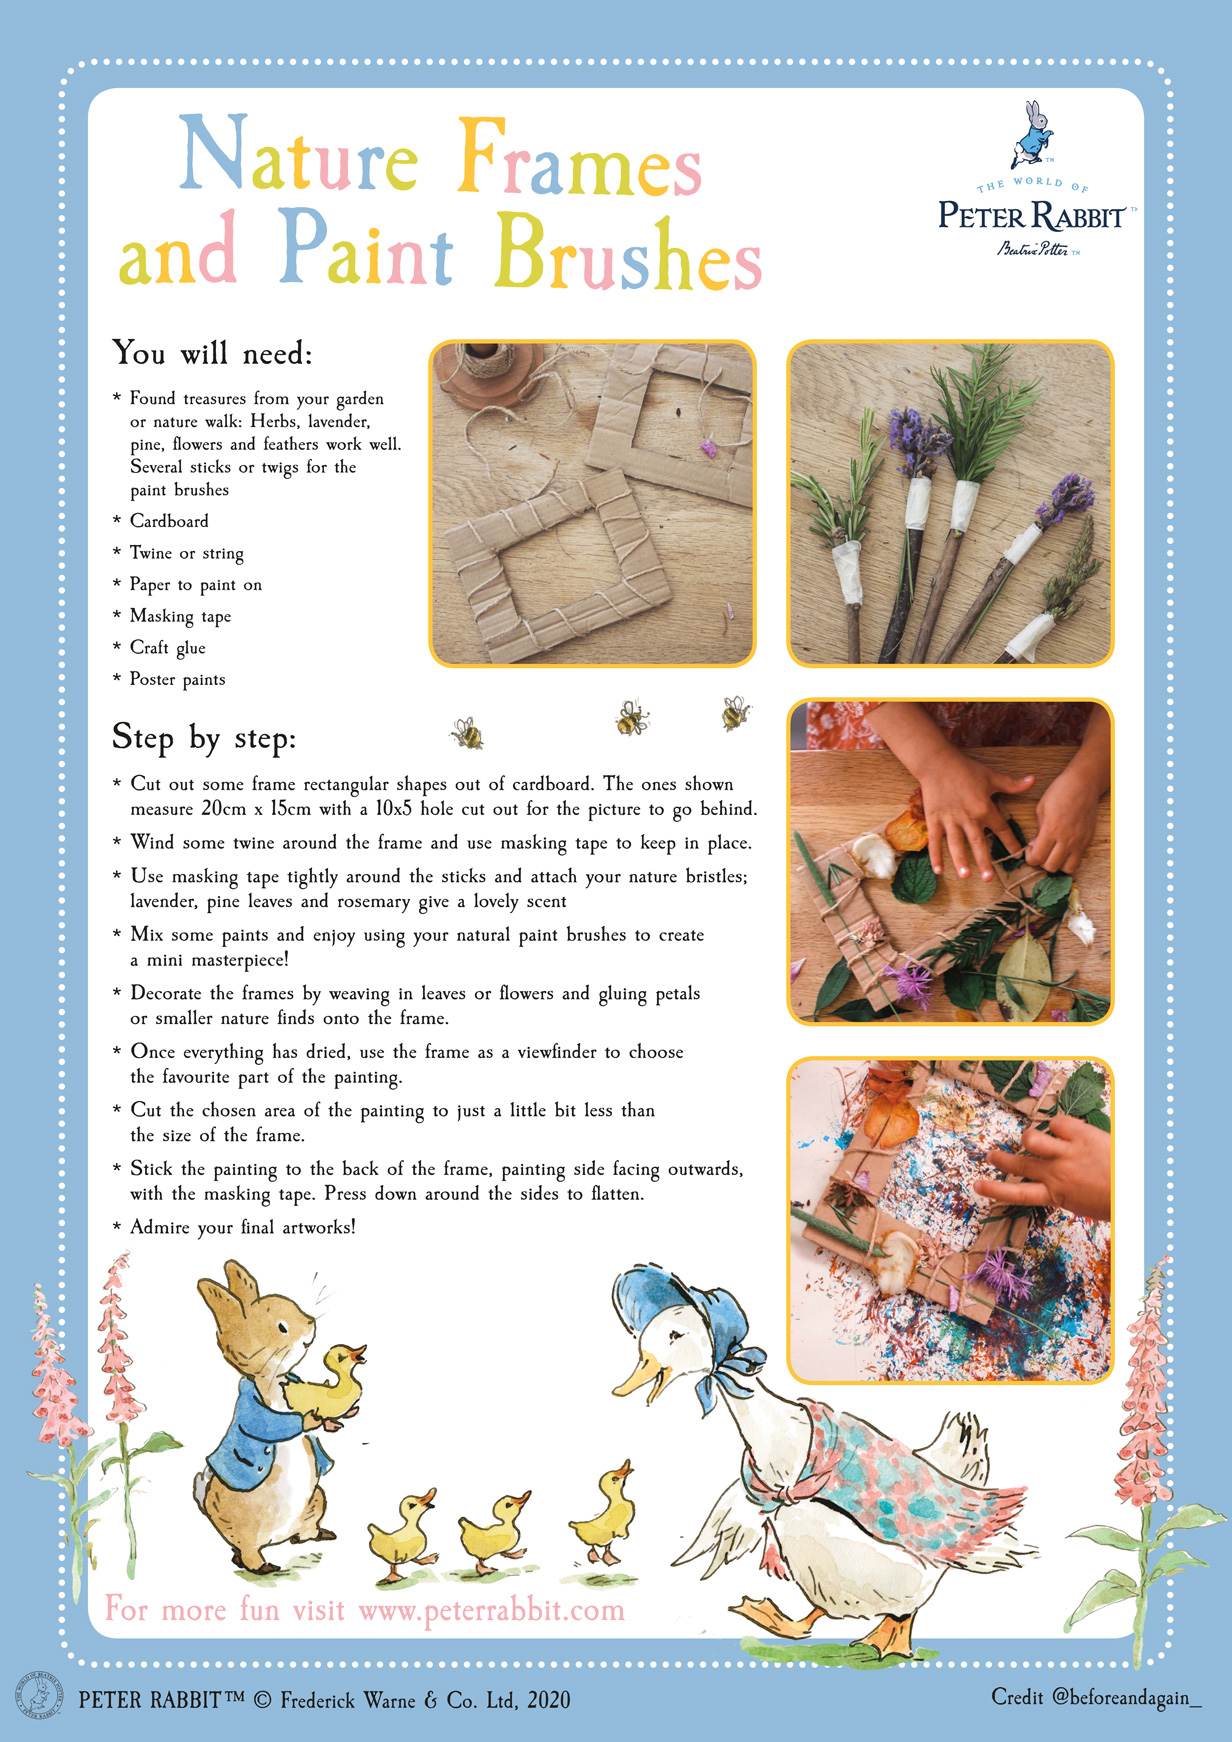 The cover image of the Nature Frames and Paint Brushes Activity Pack on the Peter Rabbit website